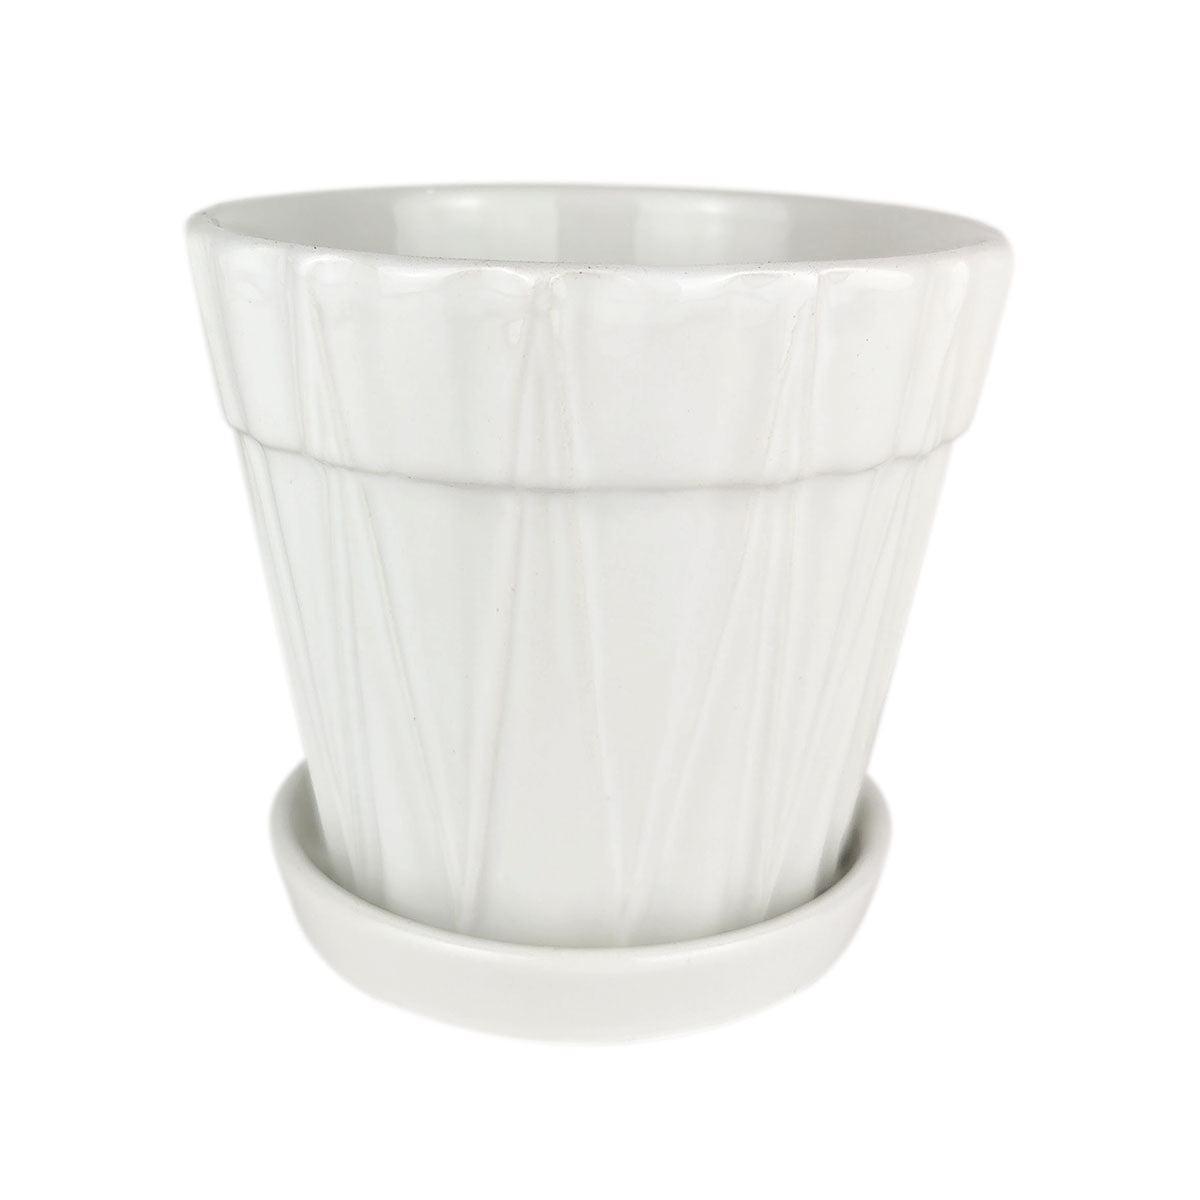 white decorative ceramic pot, pot with saucer and drainage hole, stylist white pot for houseplants